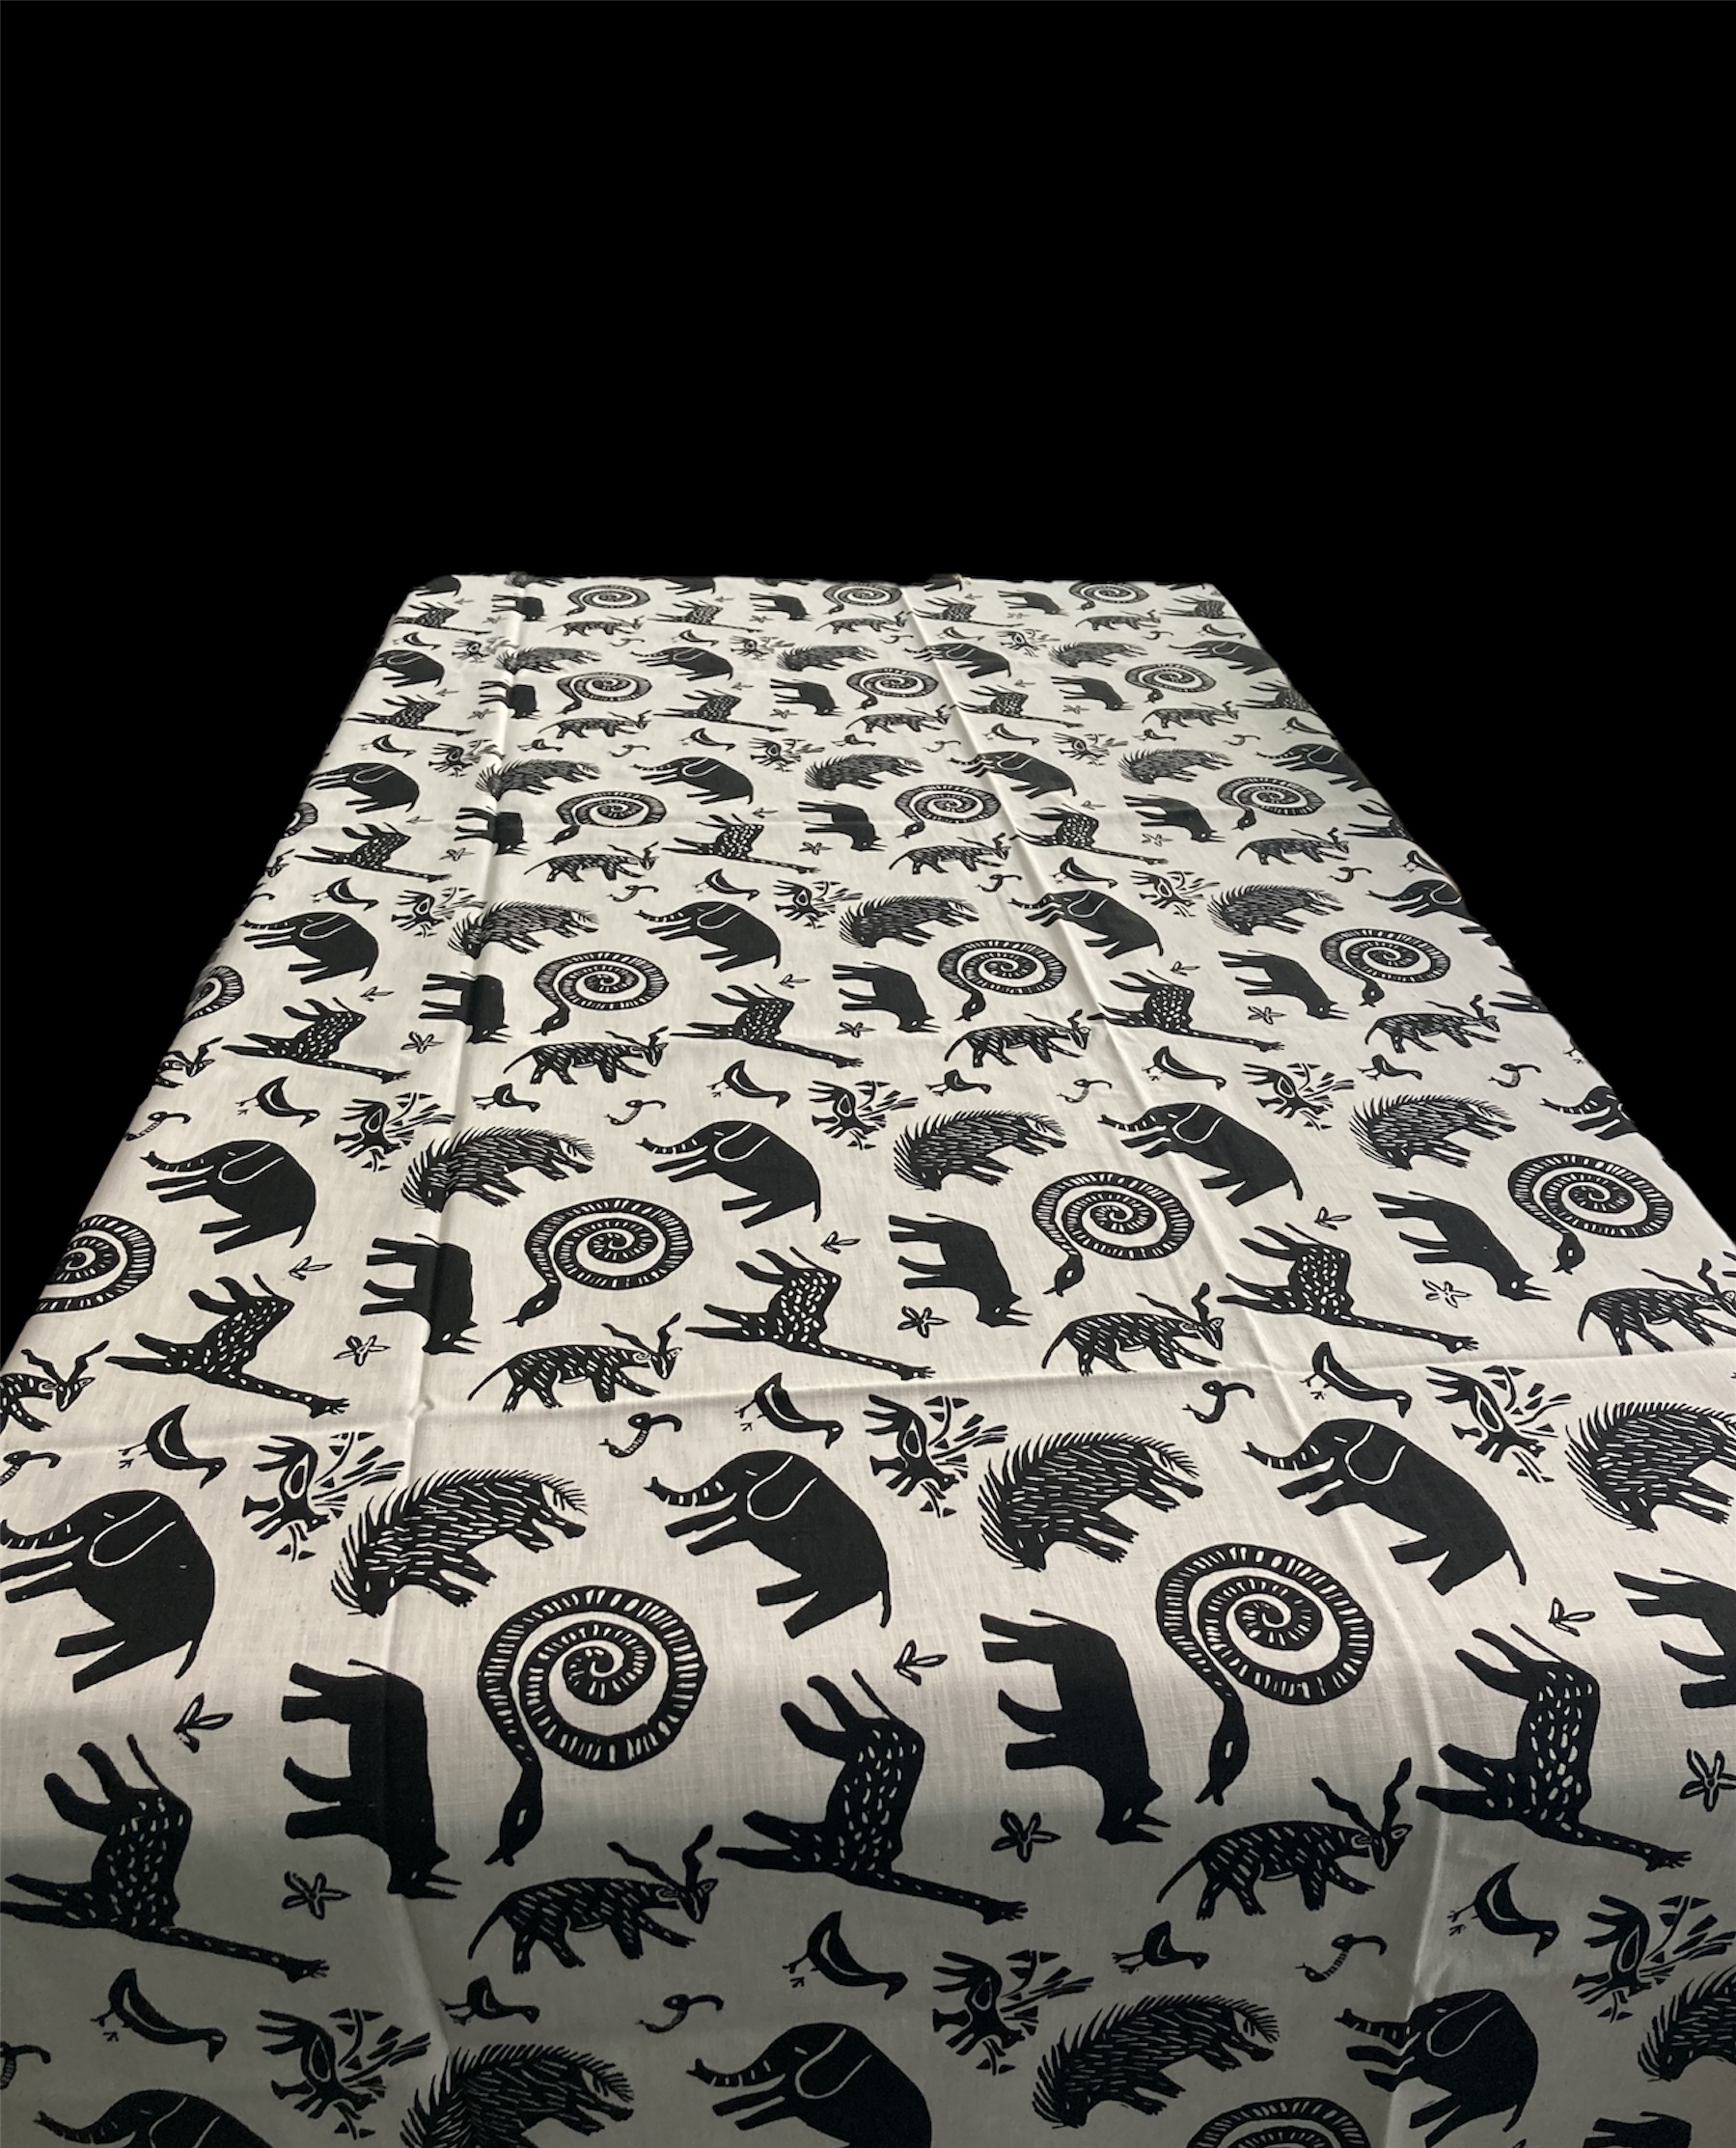 100% cotton Tablecloth approx. 98\" x 57\" from Namibia - # bw03t